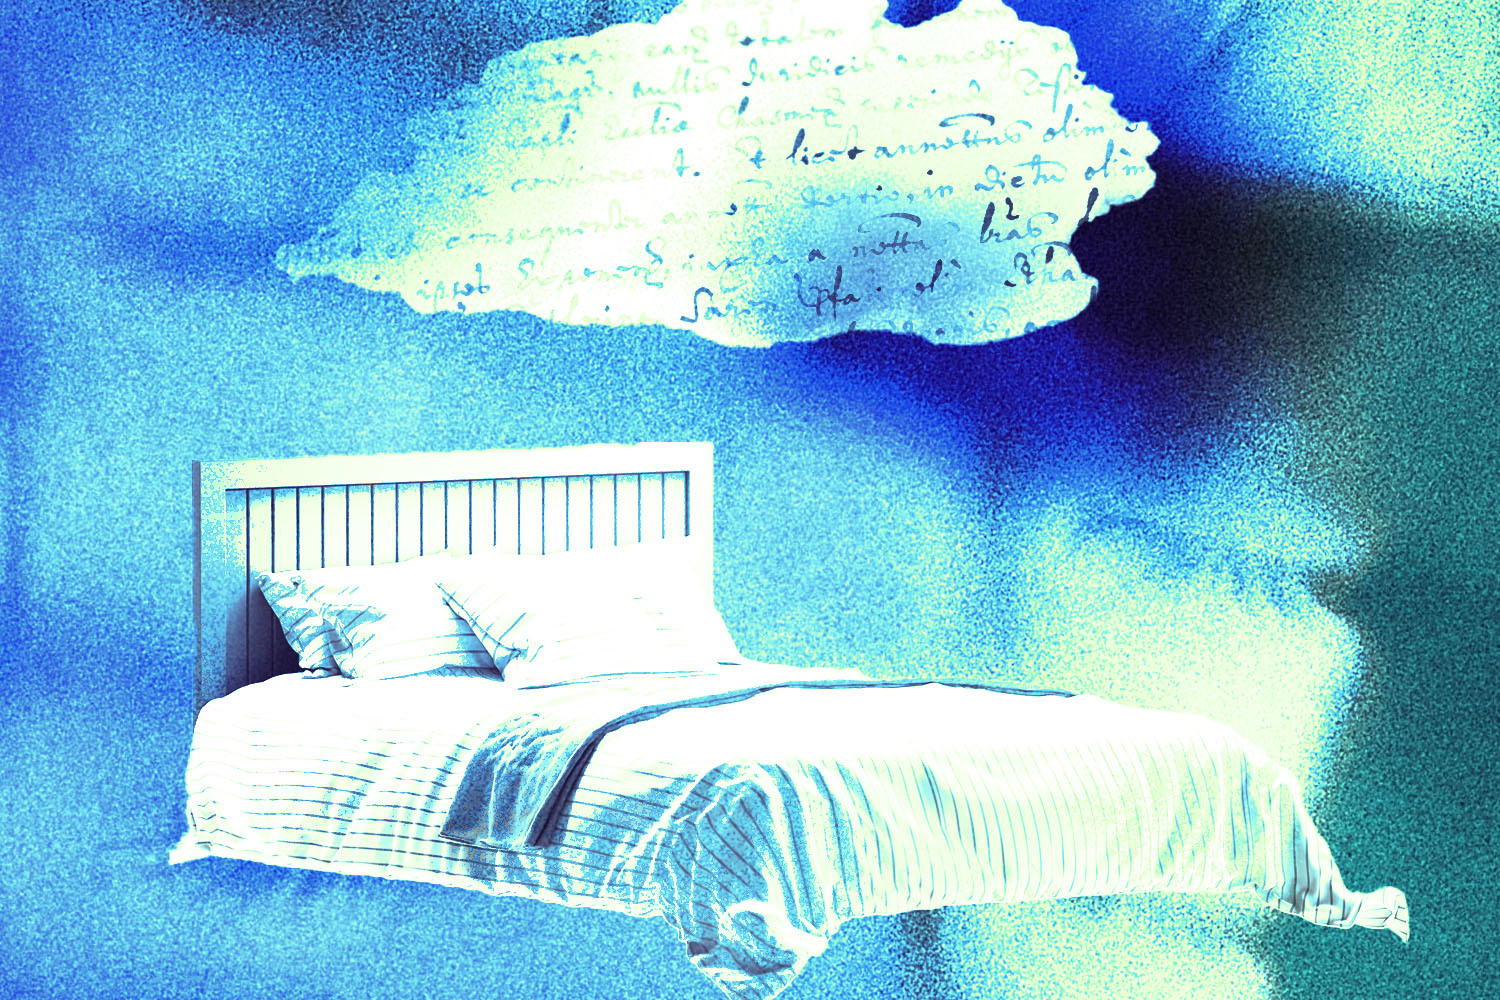 How “Adult Bedtime Stories” Became an Unlikely Insomnia Cure